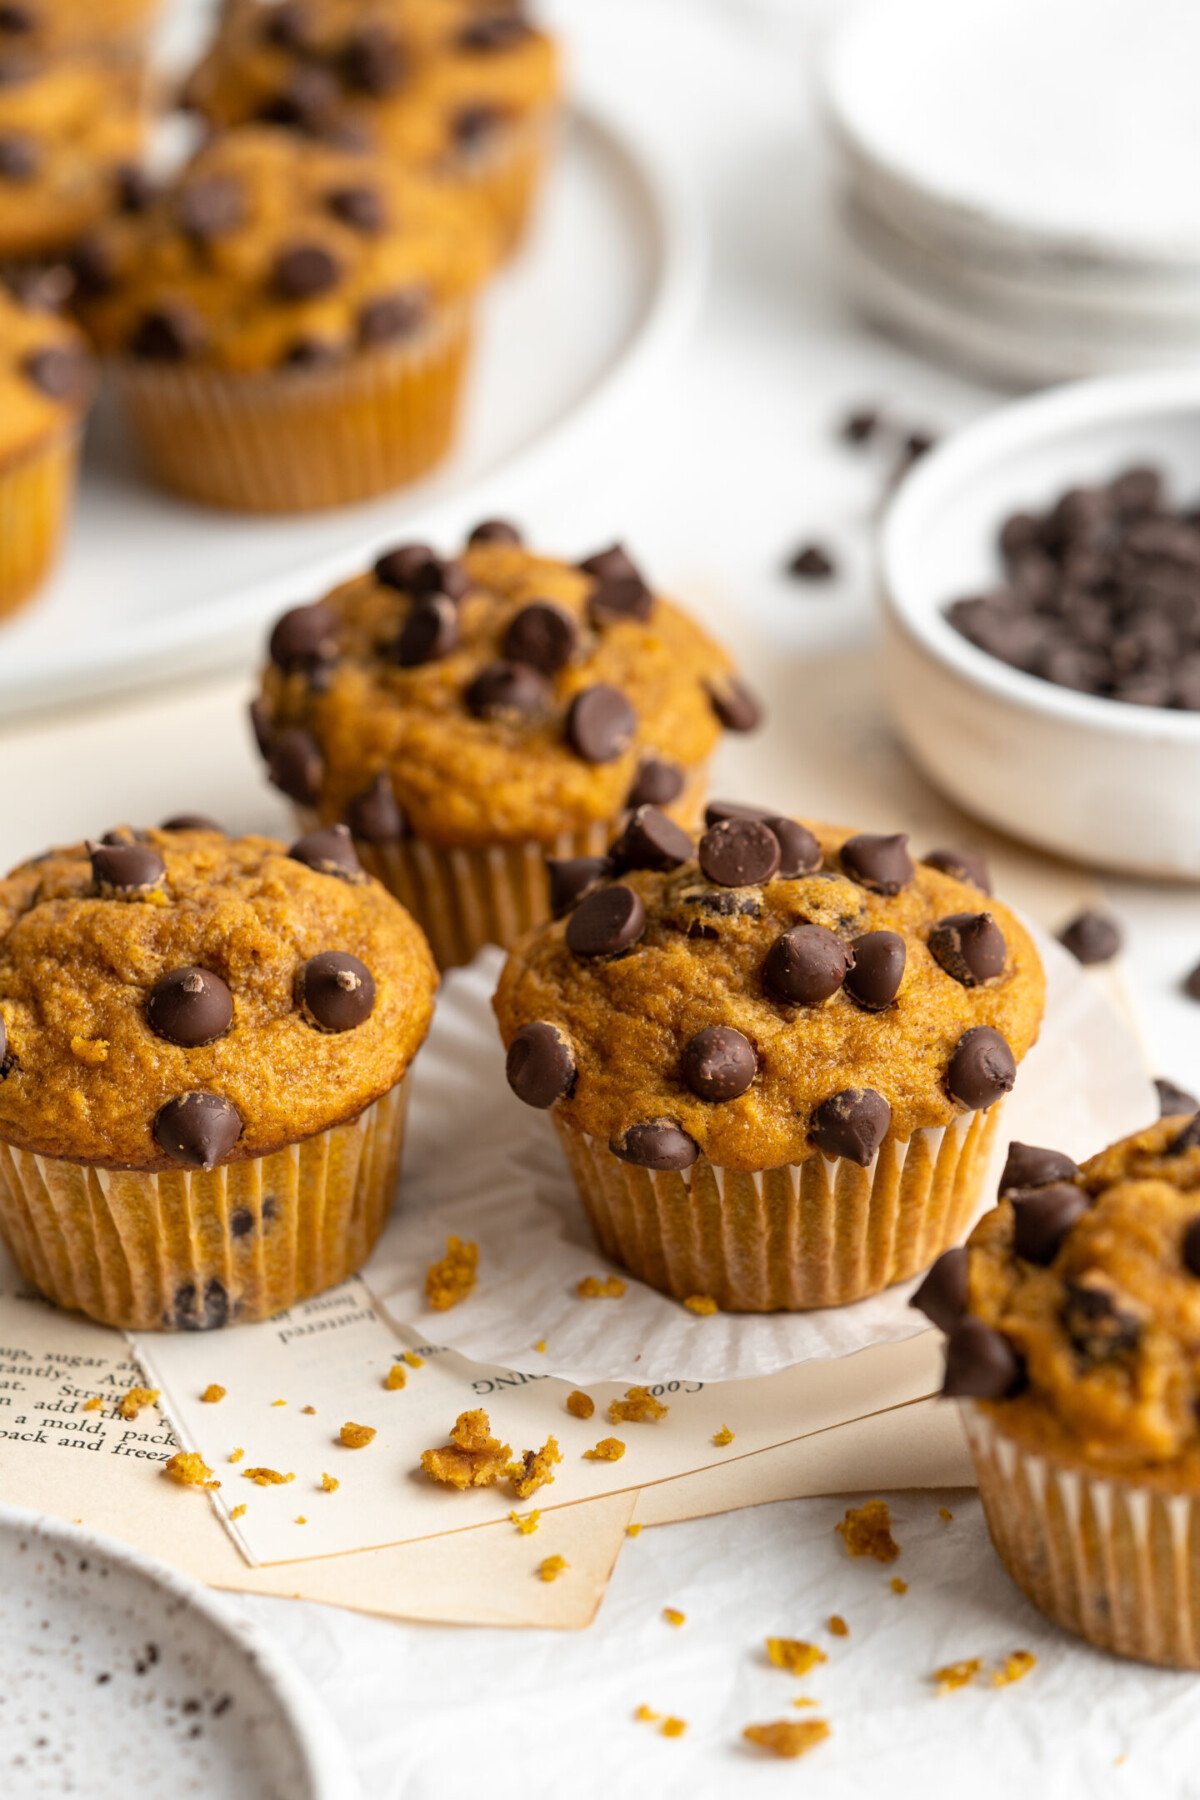 Four pumpkin chocolate chip muffins with a plate of muffins in the background, and a bowl of chocolate chips.